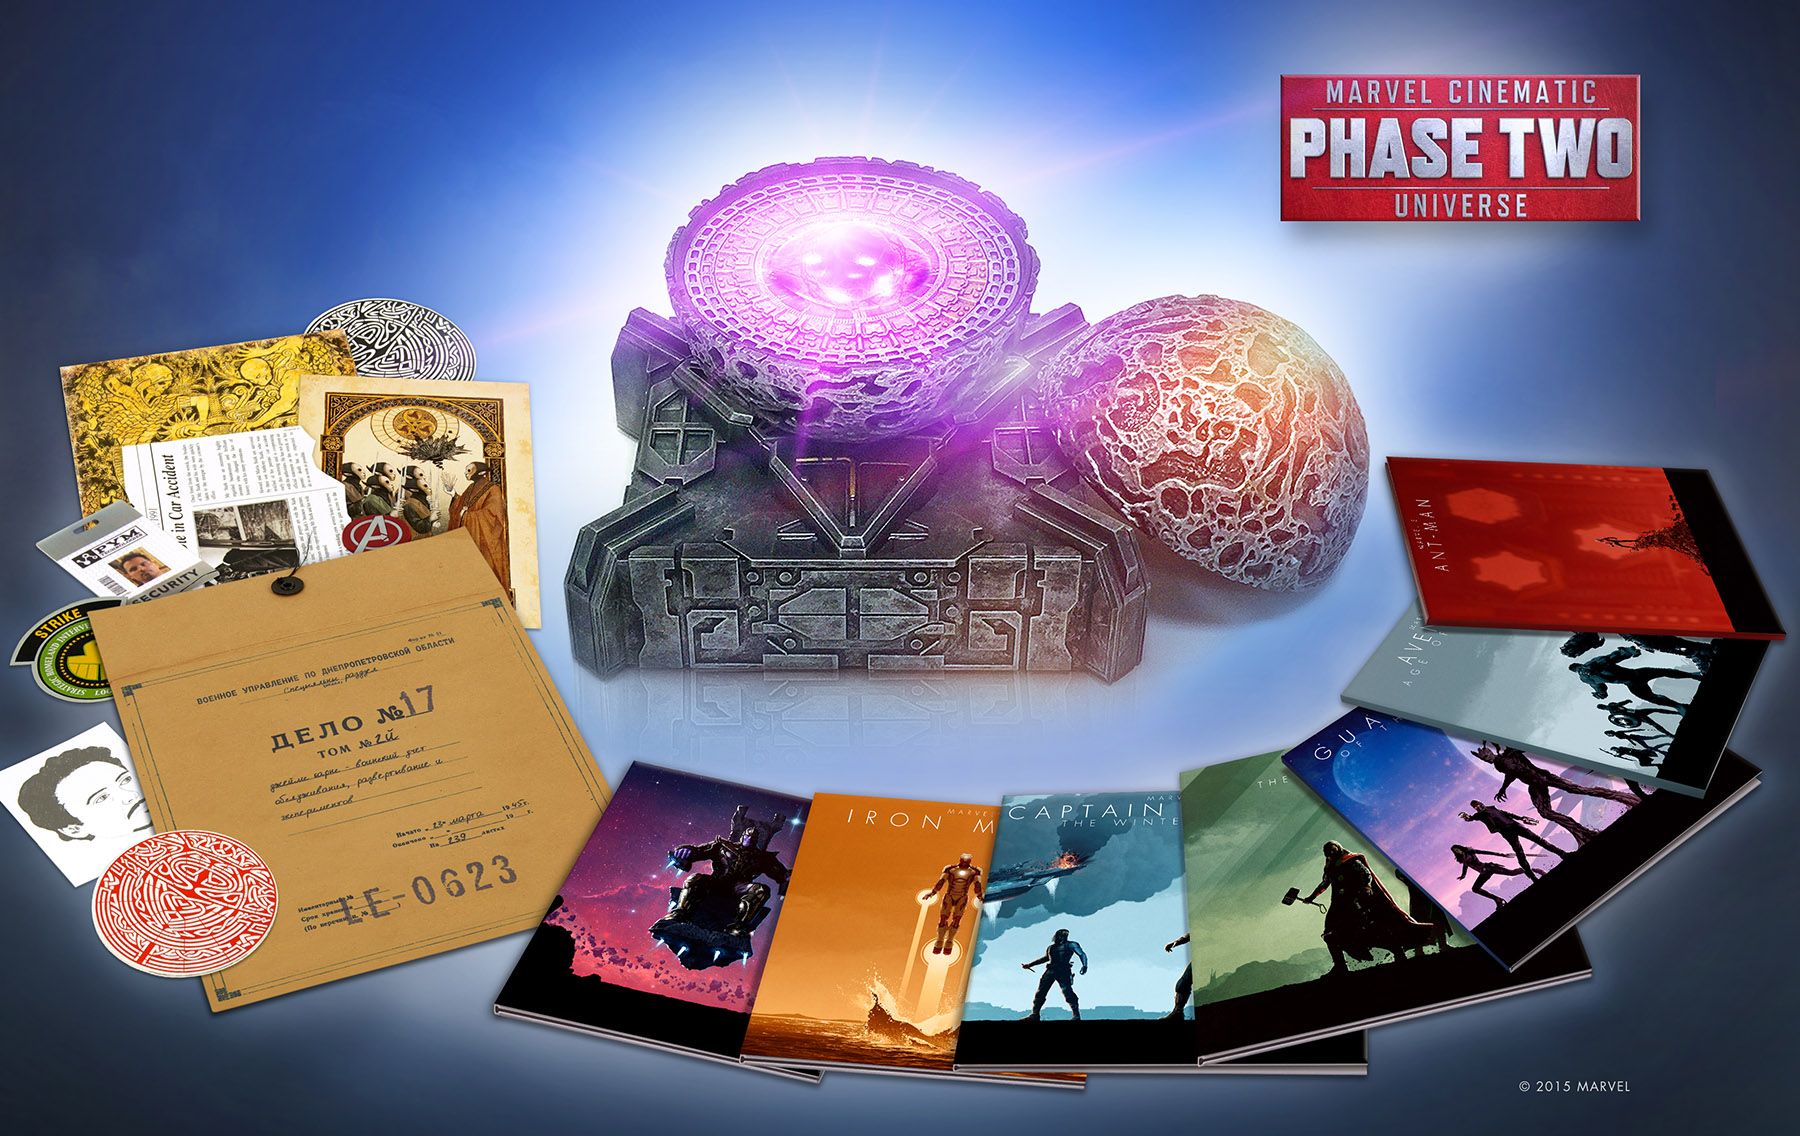 Marvel Cinematic Universe Phase 2 Two Blu-ray Collectors Set